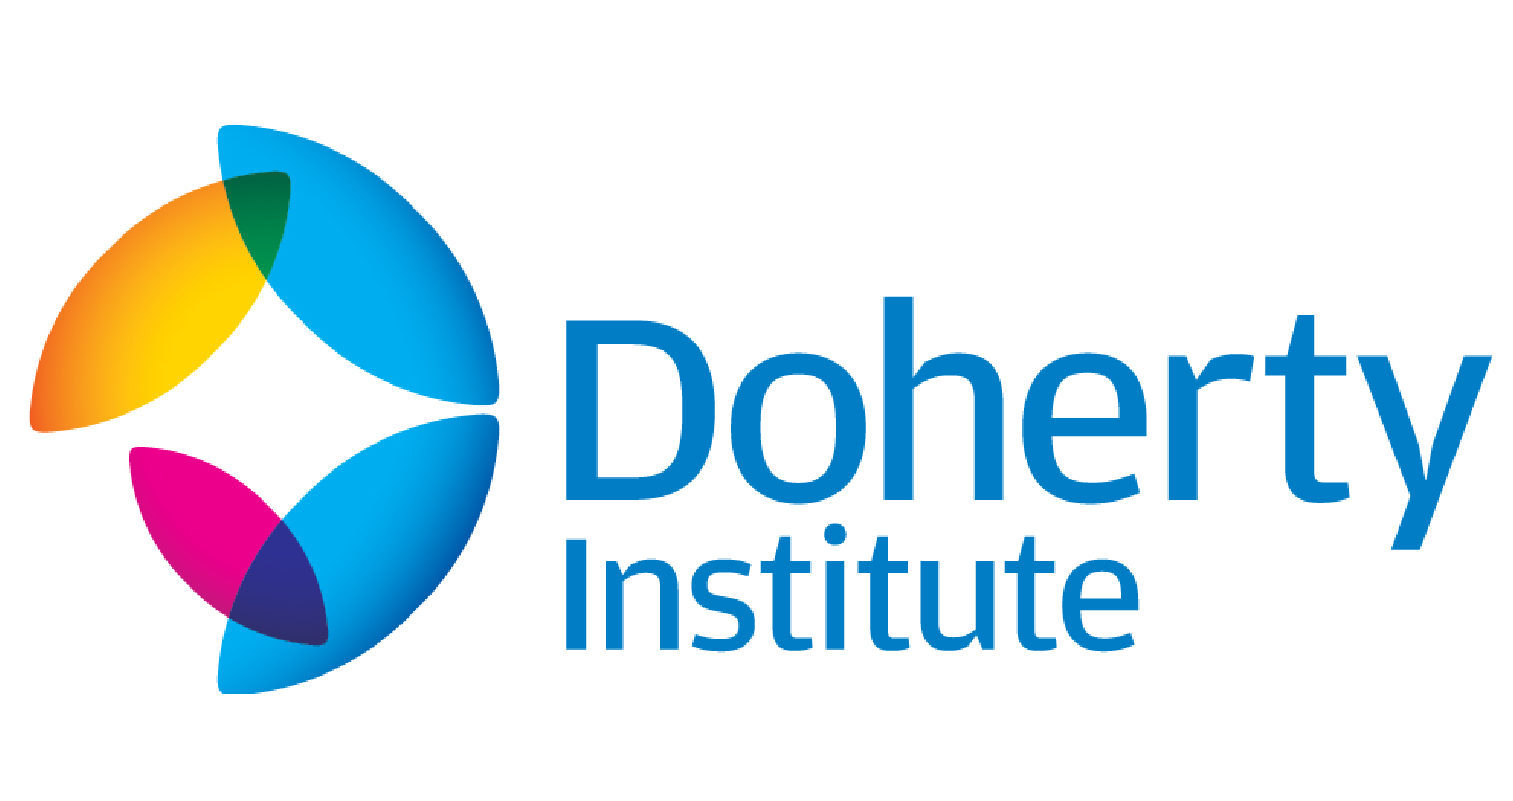  The Peter Doherty Institute for Infection and Immunity Logo